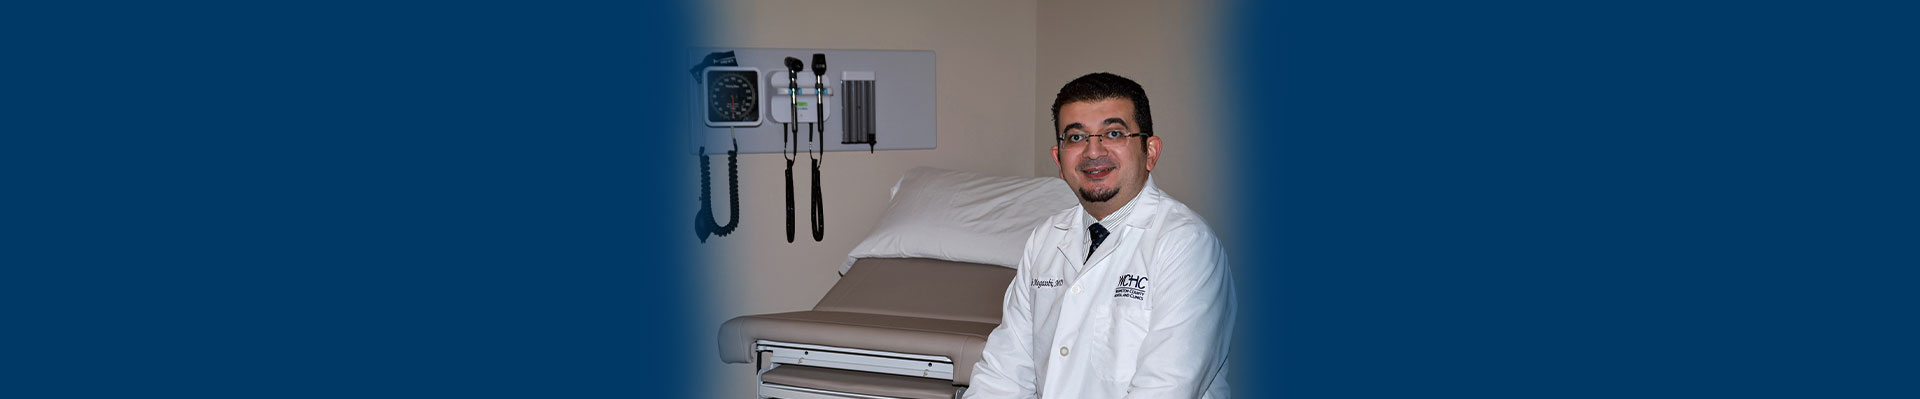 Banner picture of a Male Physician smiling.
Specialty Services